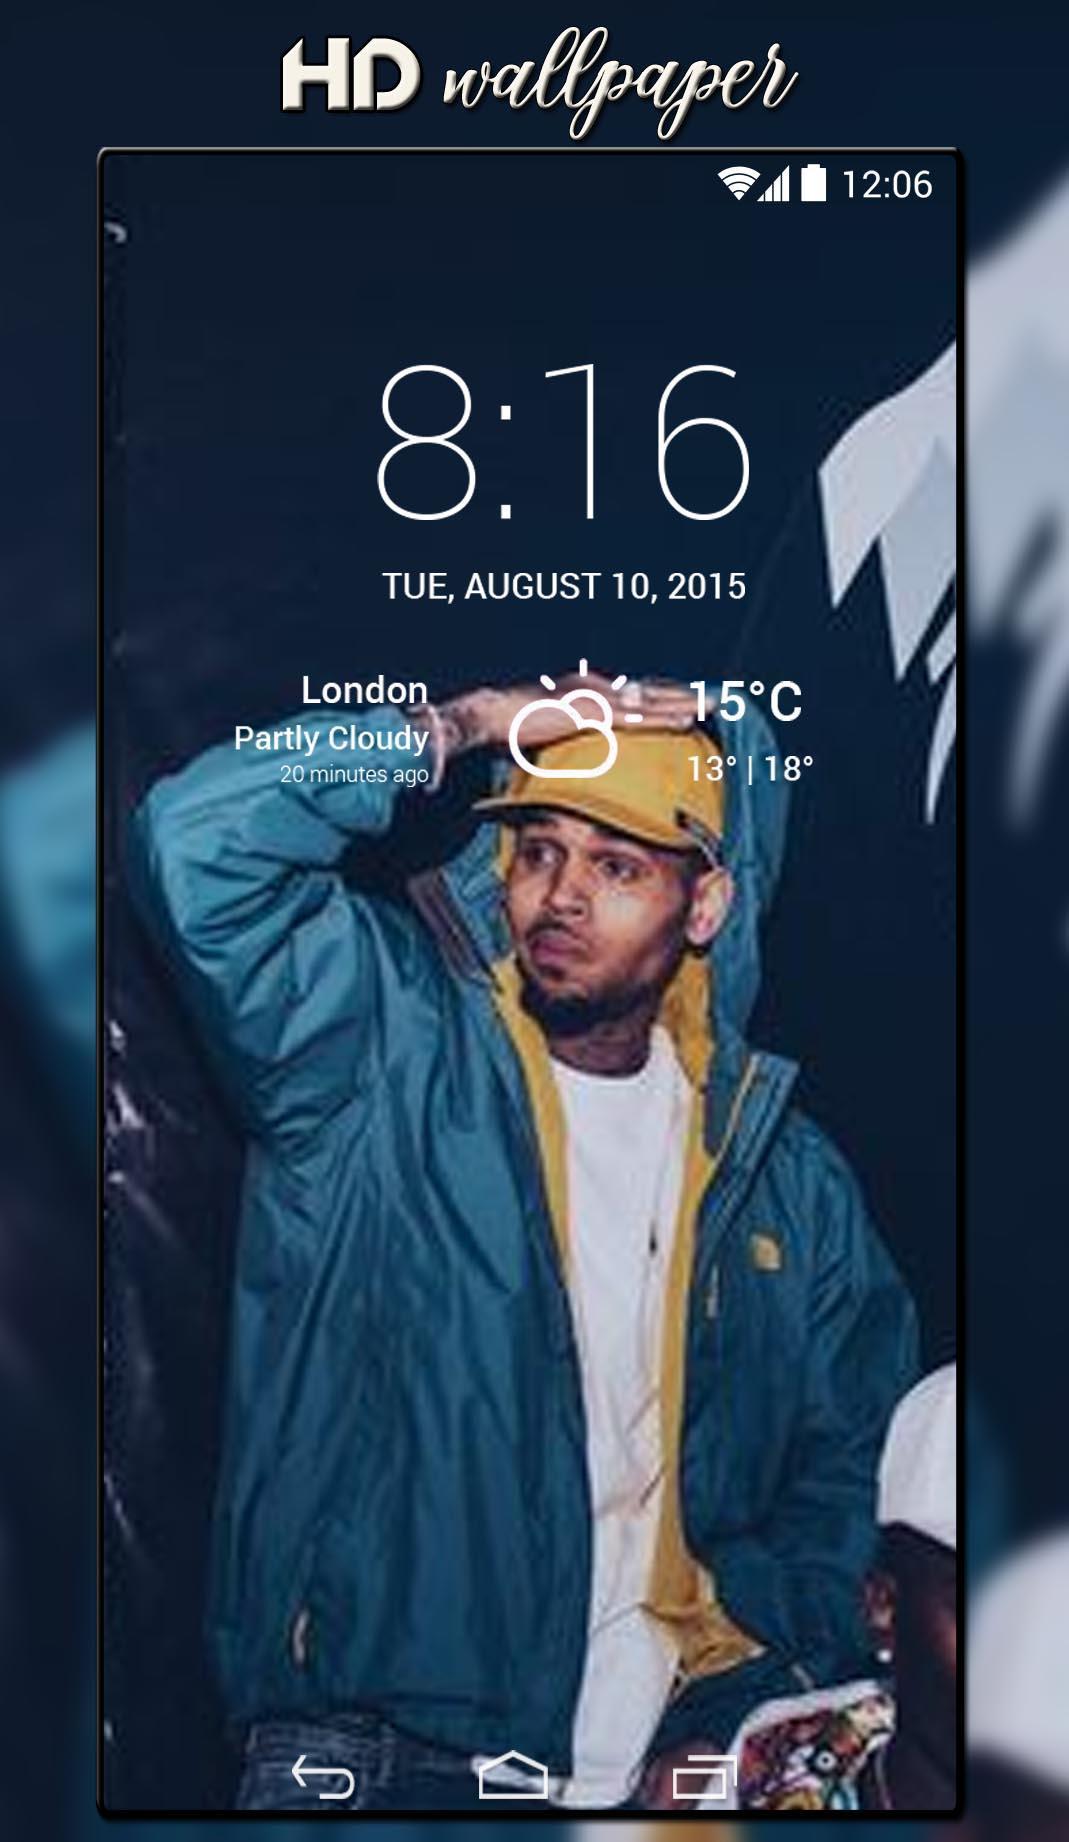 Chris Brown Wallpaper Hd For Android Apk Download Images, Photos, Reviews